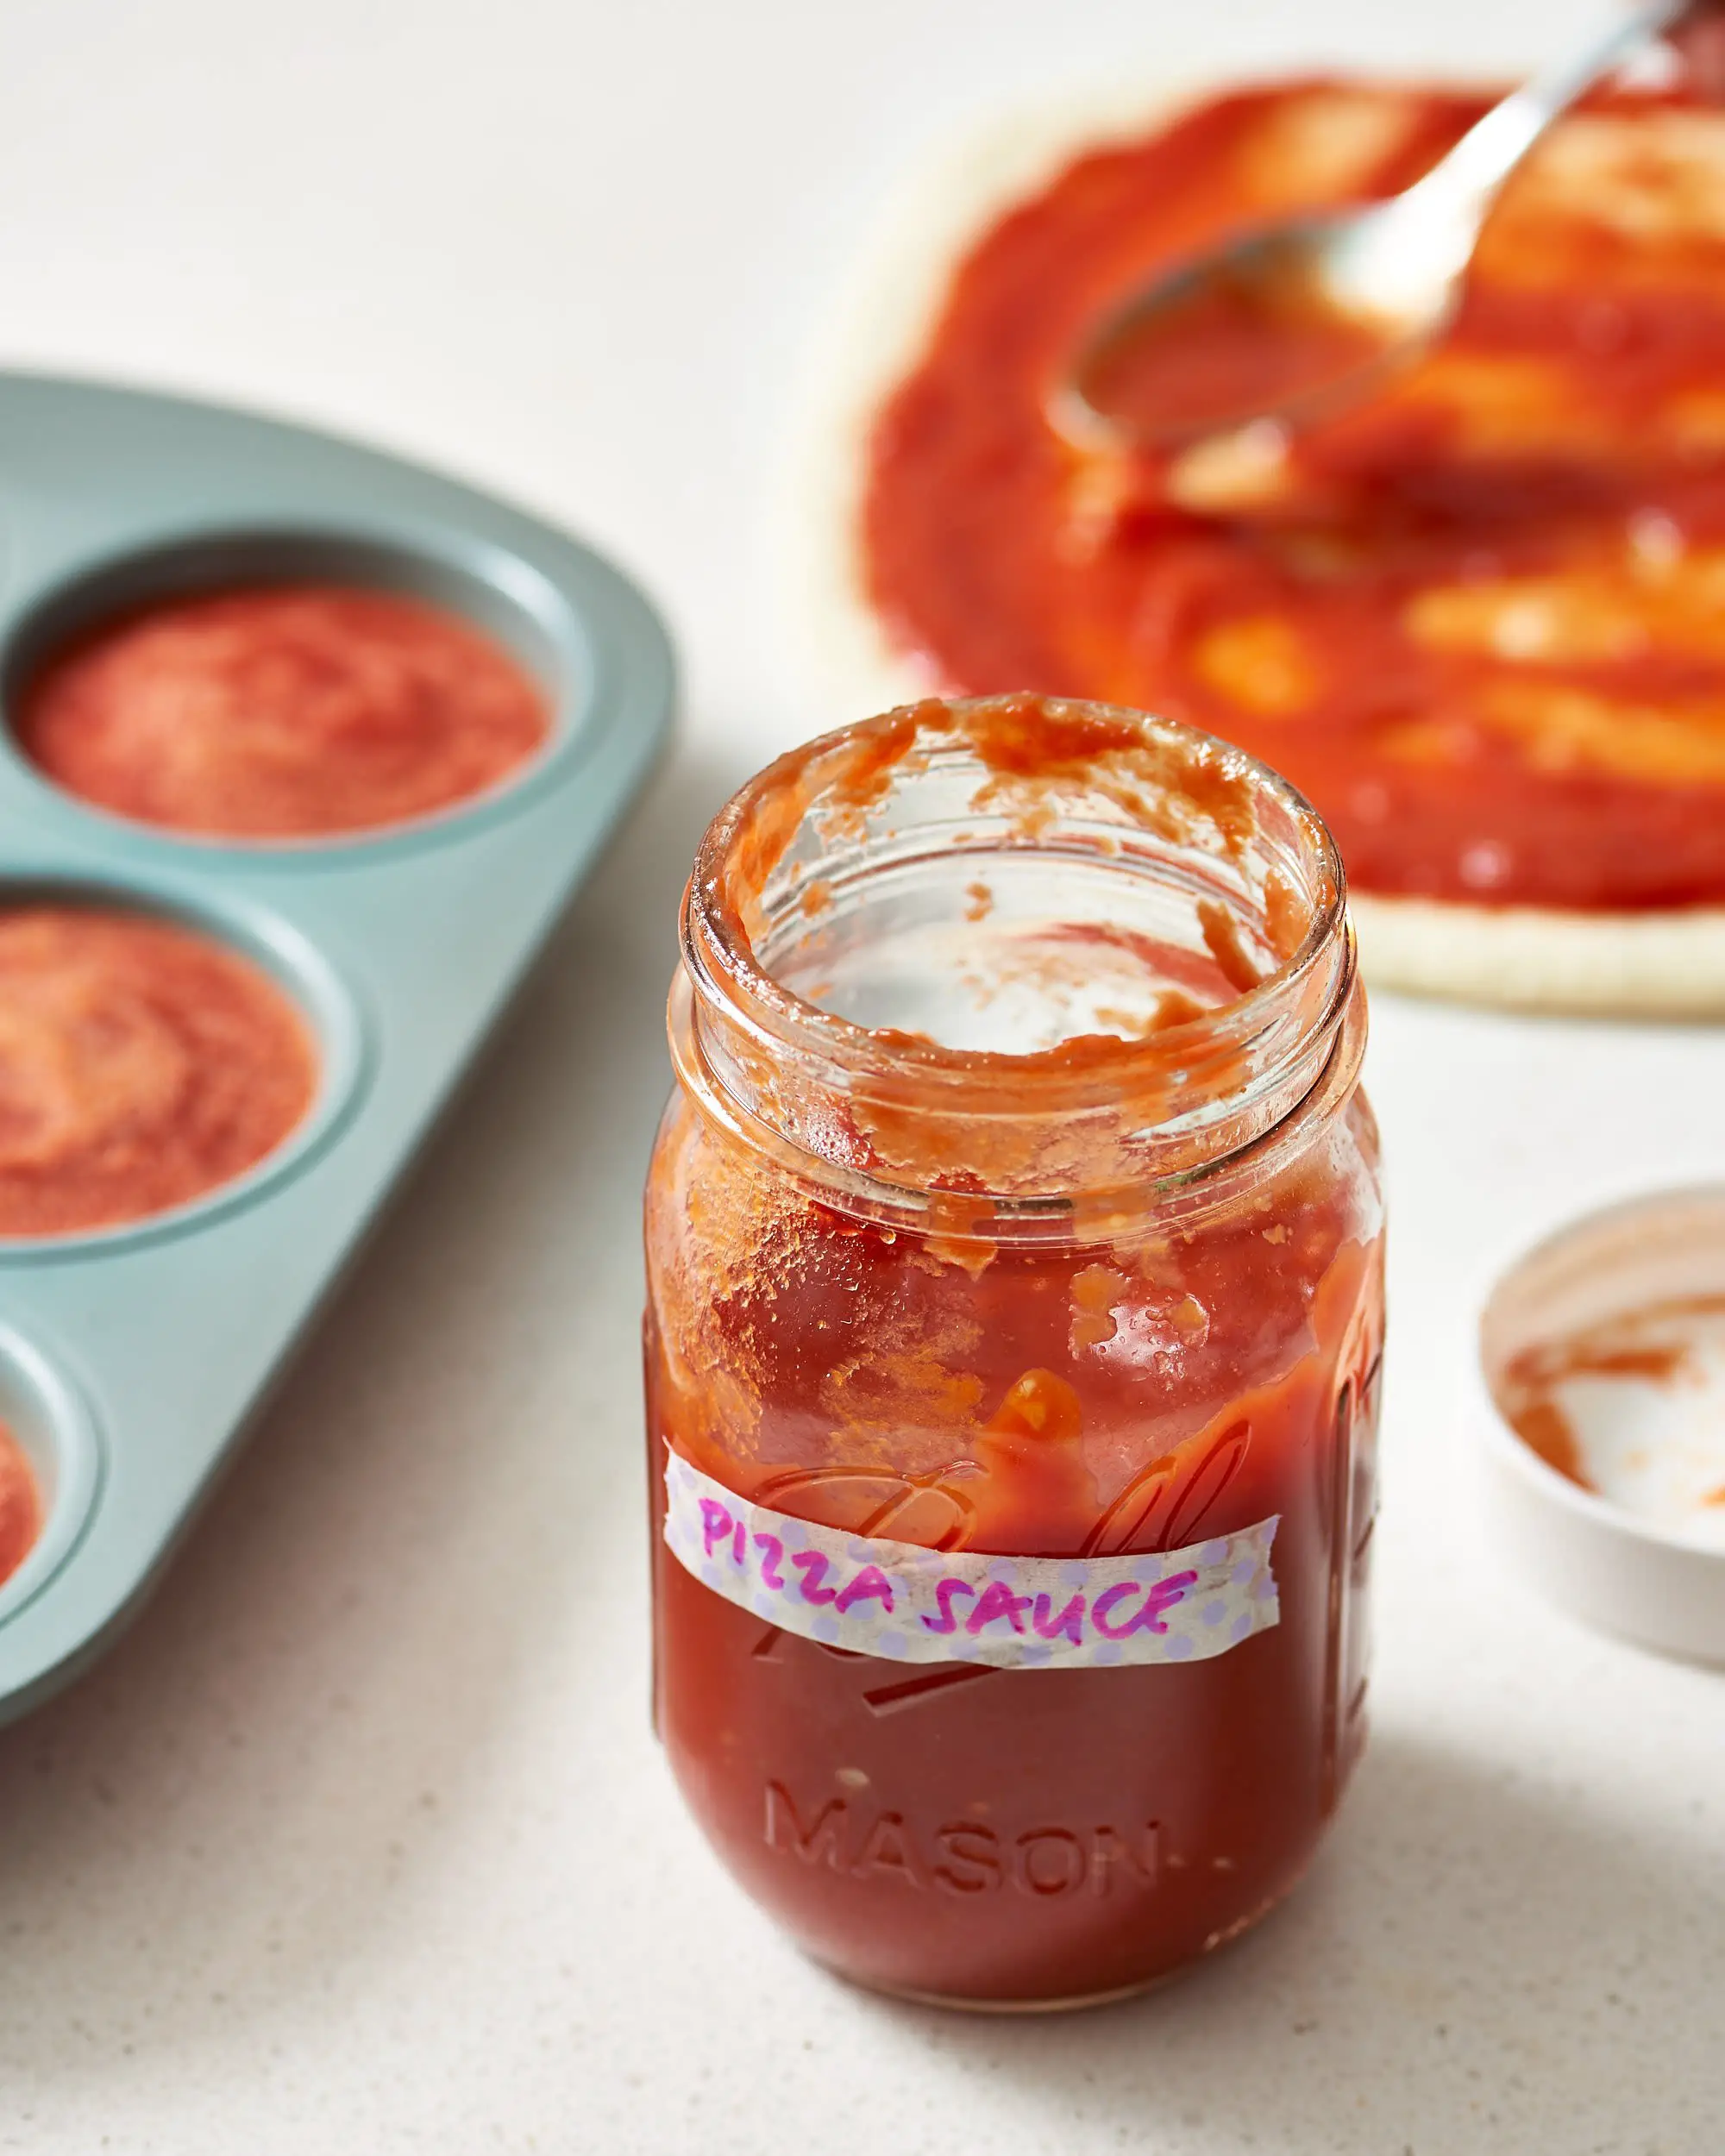 How To Make Pizza Sauce